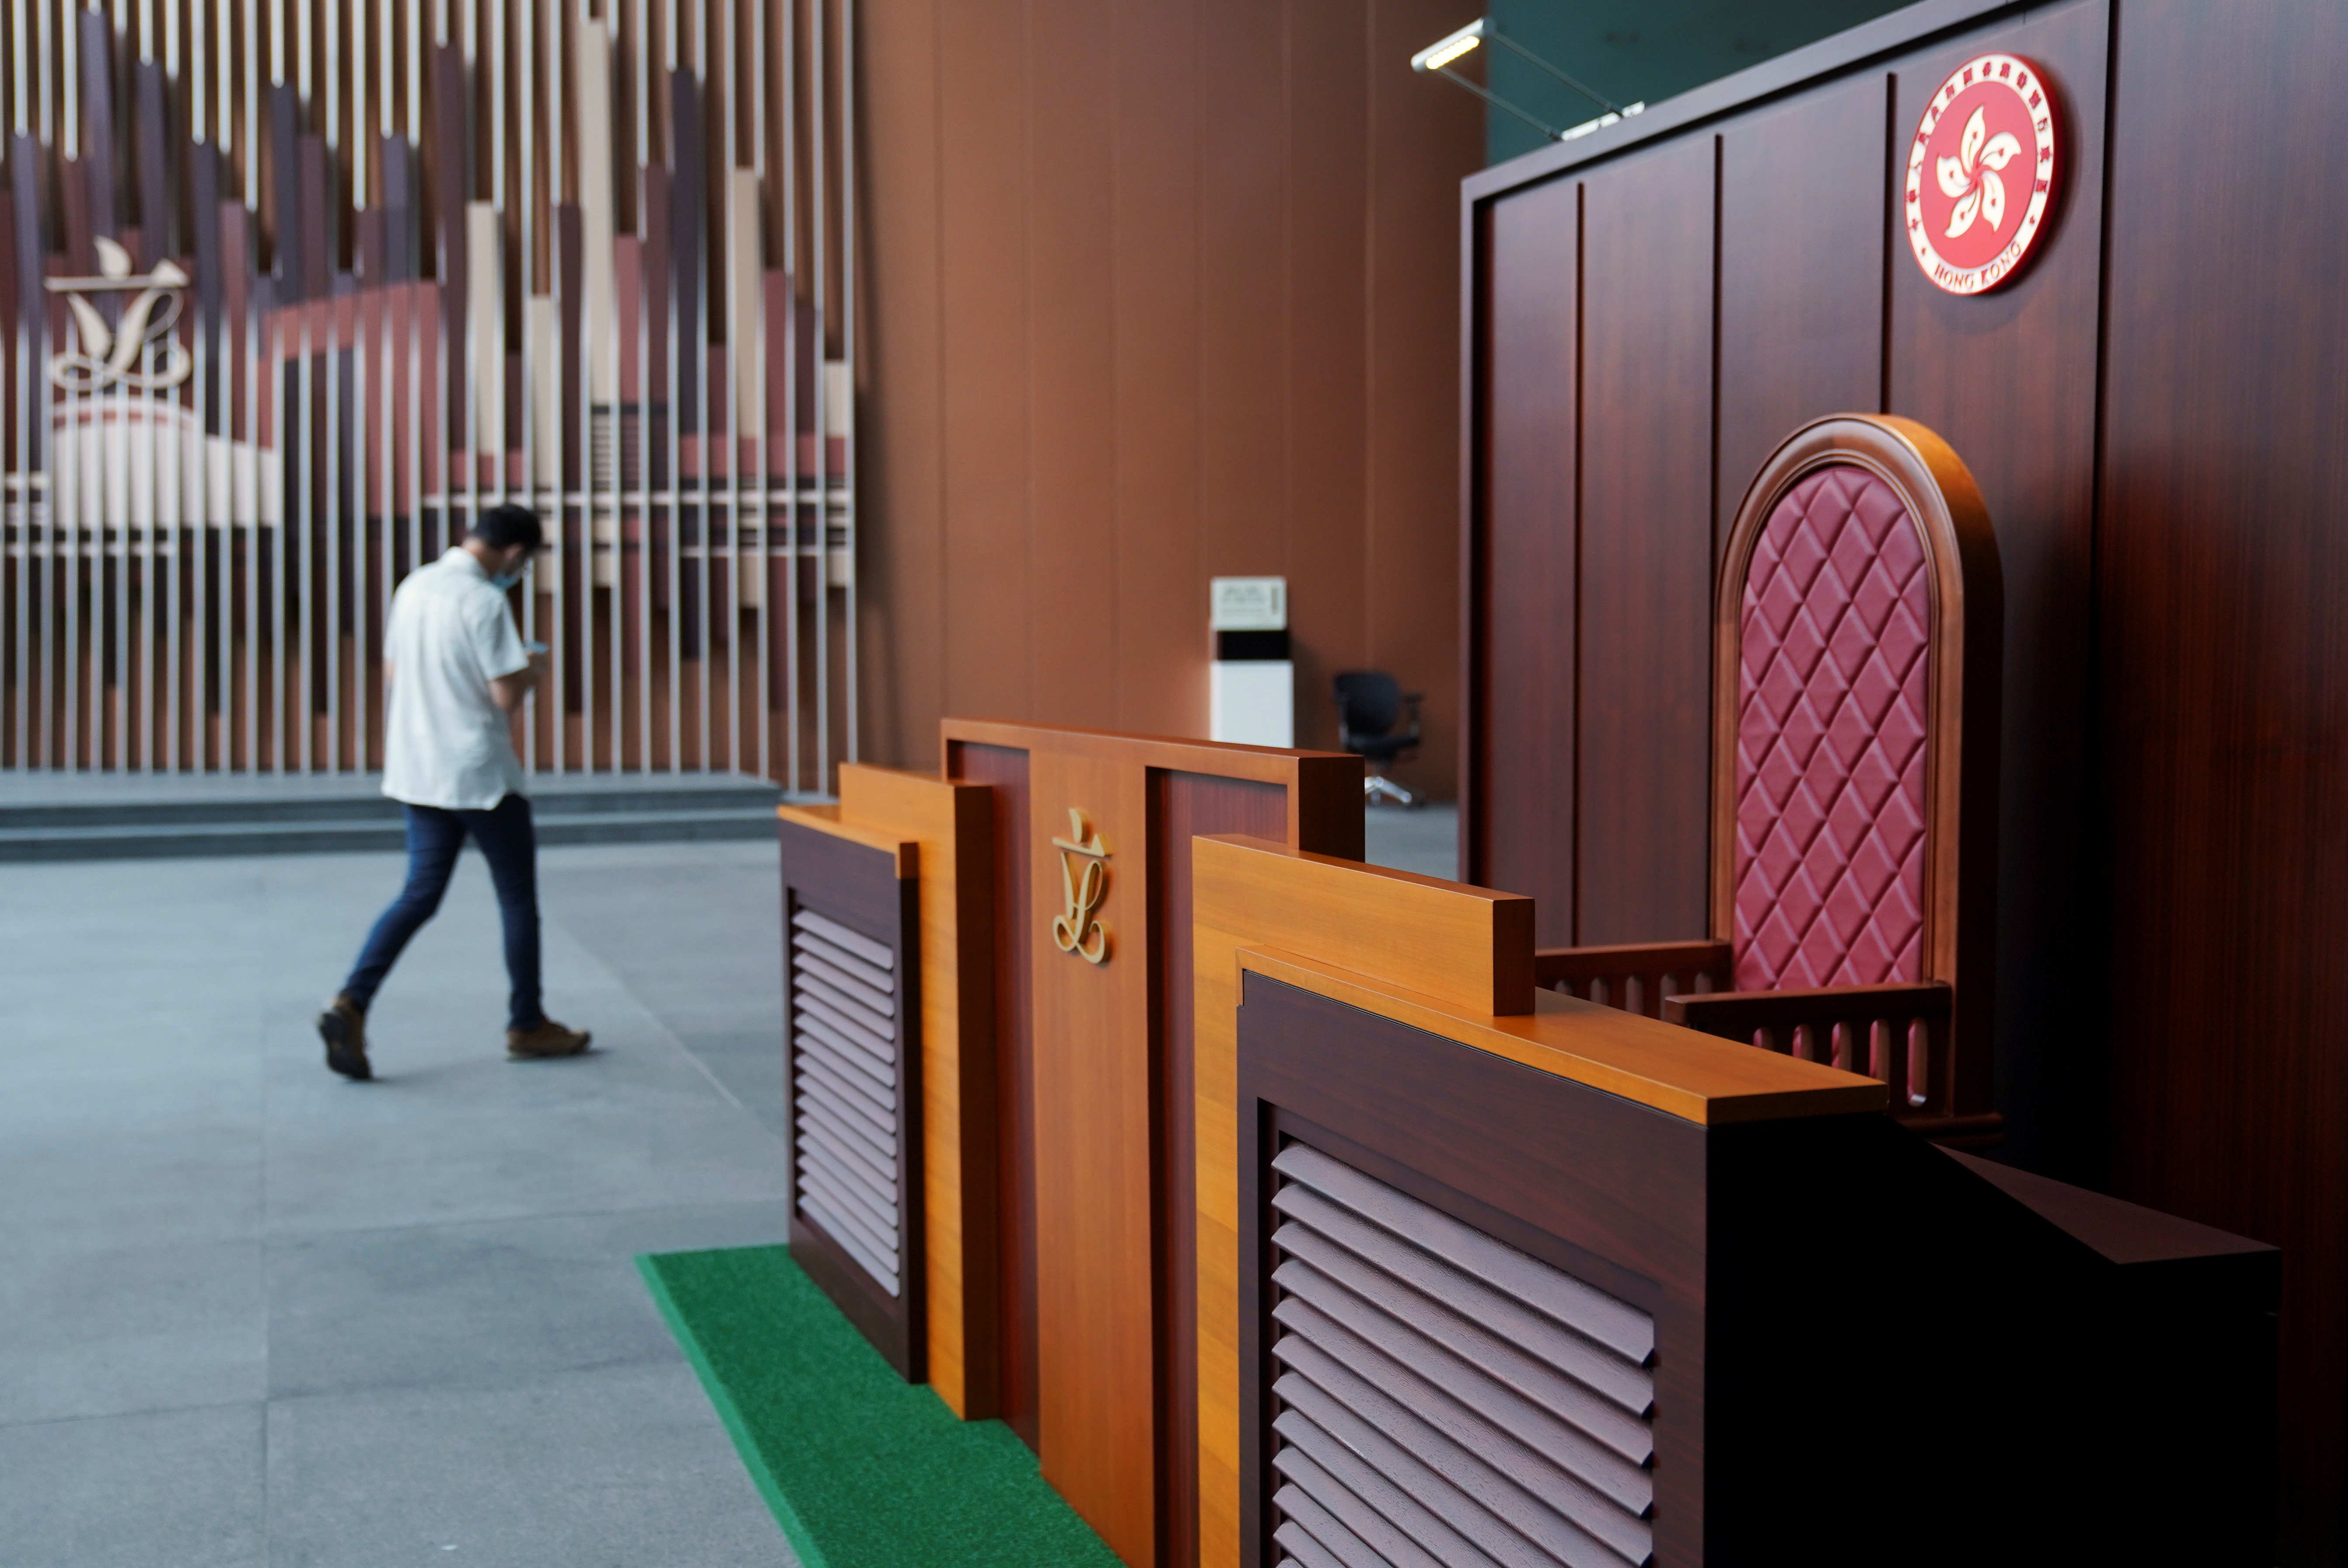 Man walks past a model of the president's seat at the Legislative Council in Hong Kong